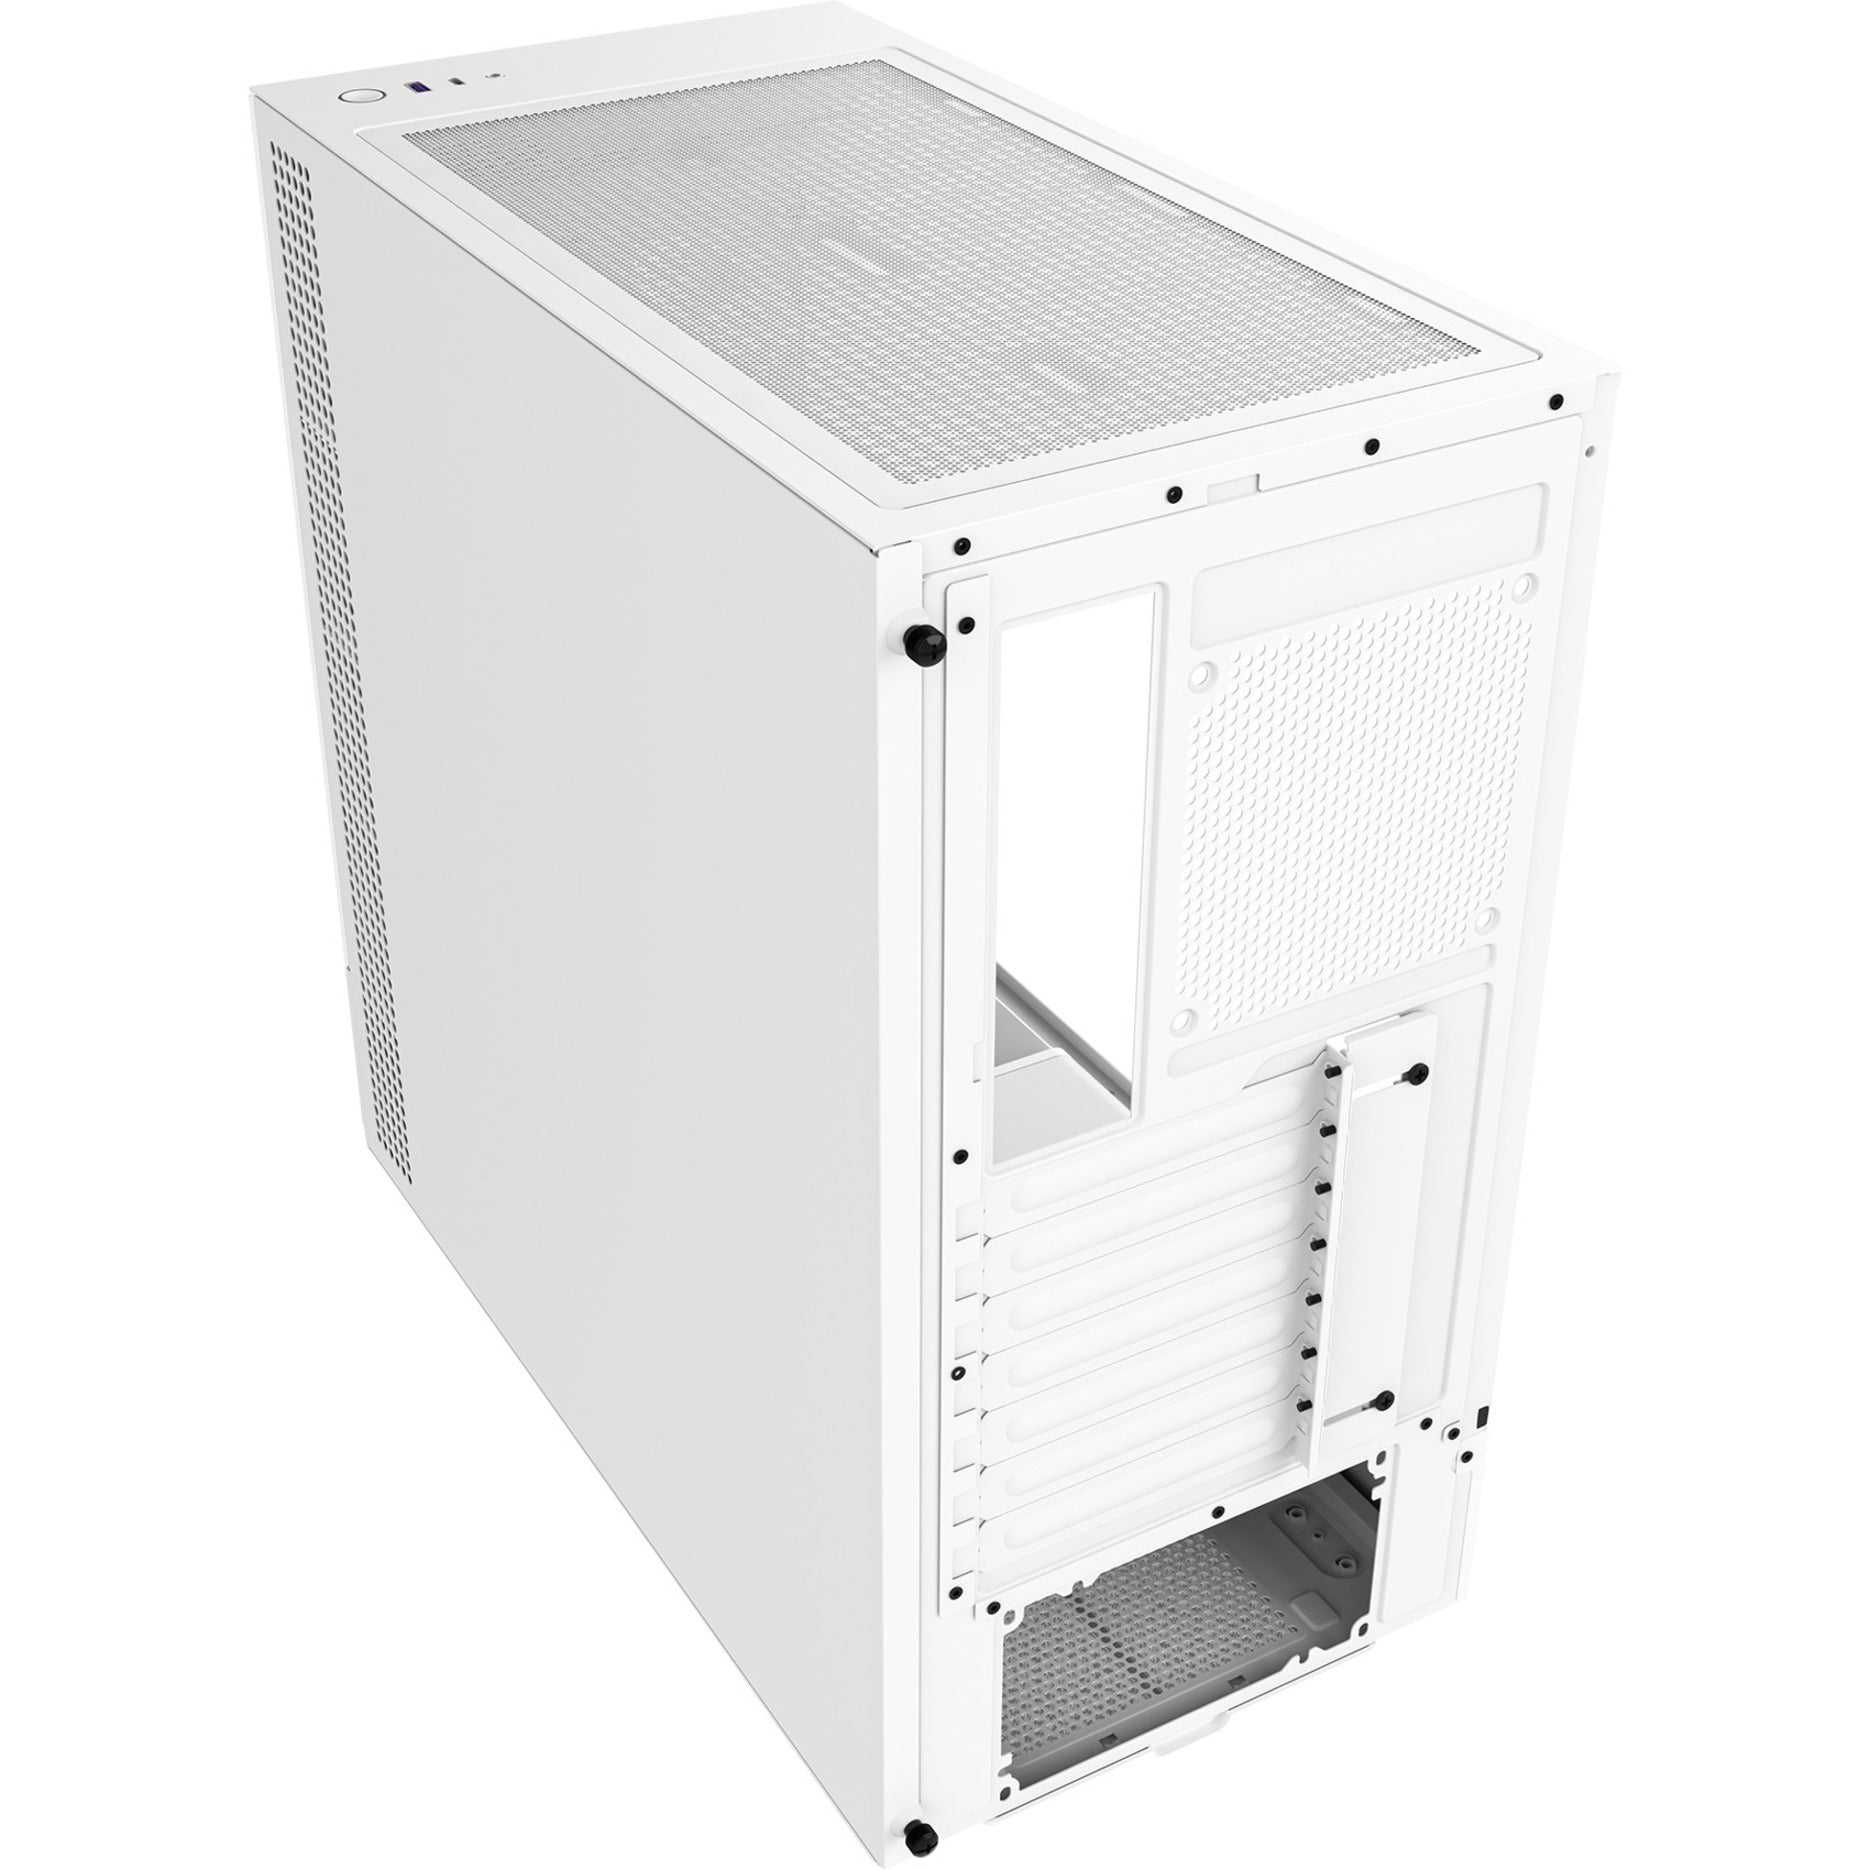 NZXT CC-H51EW-01 H5 Elite Premium Compact Mid-Tower Case, White, Tempered Glass, 2x 2.5" Bays, 1x 3.5" Bay, 7 Expansion Slots, 2 USB Ports, Micro ATX/Mini ITX/ATX Supported, 3 Fans Installed